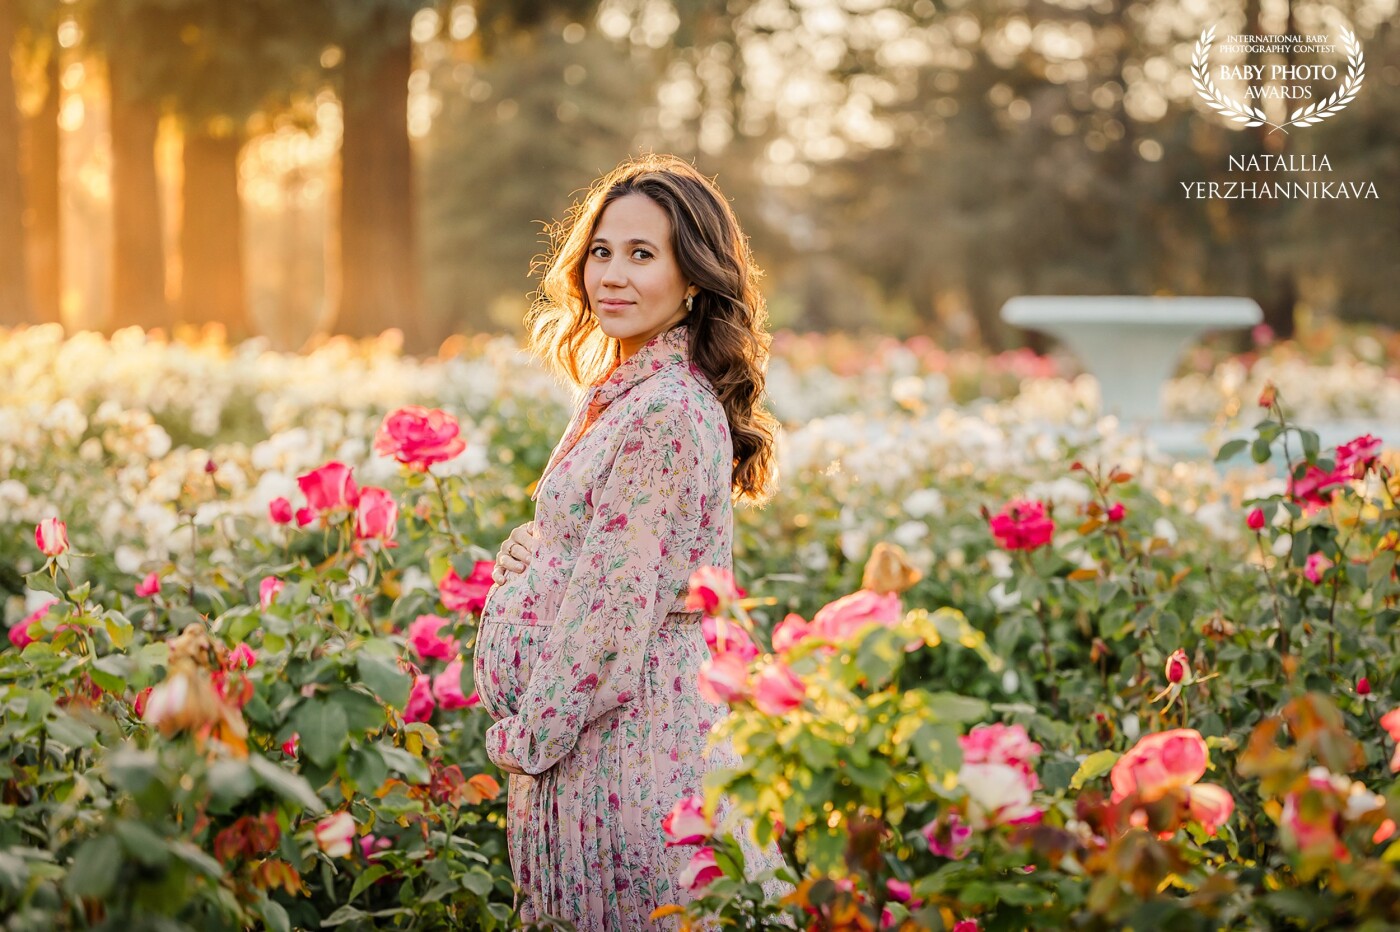 It was the First for both of us. The first baby for this beautiful mama and the first maternity session for me as her photographer. It was peaceful, magical and full of life!